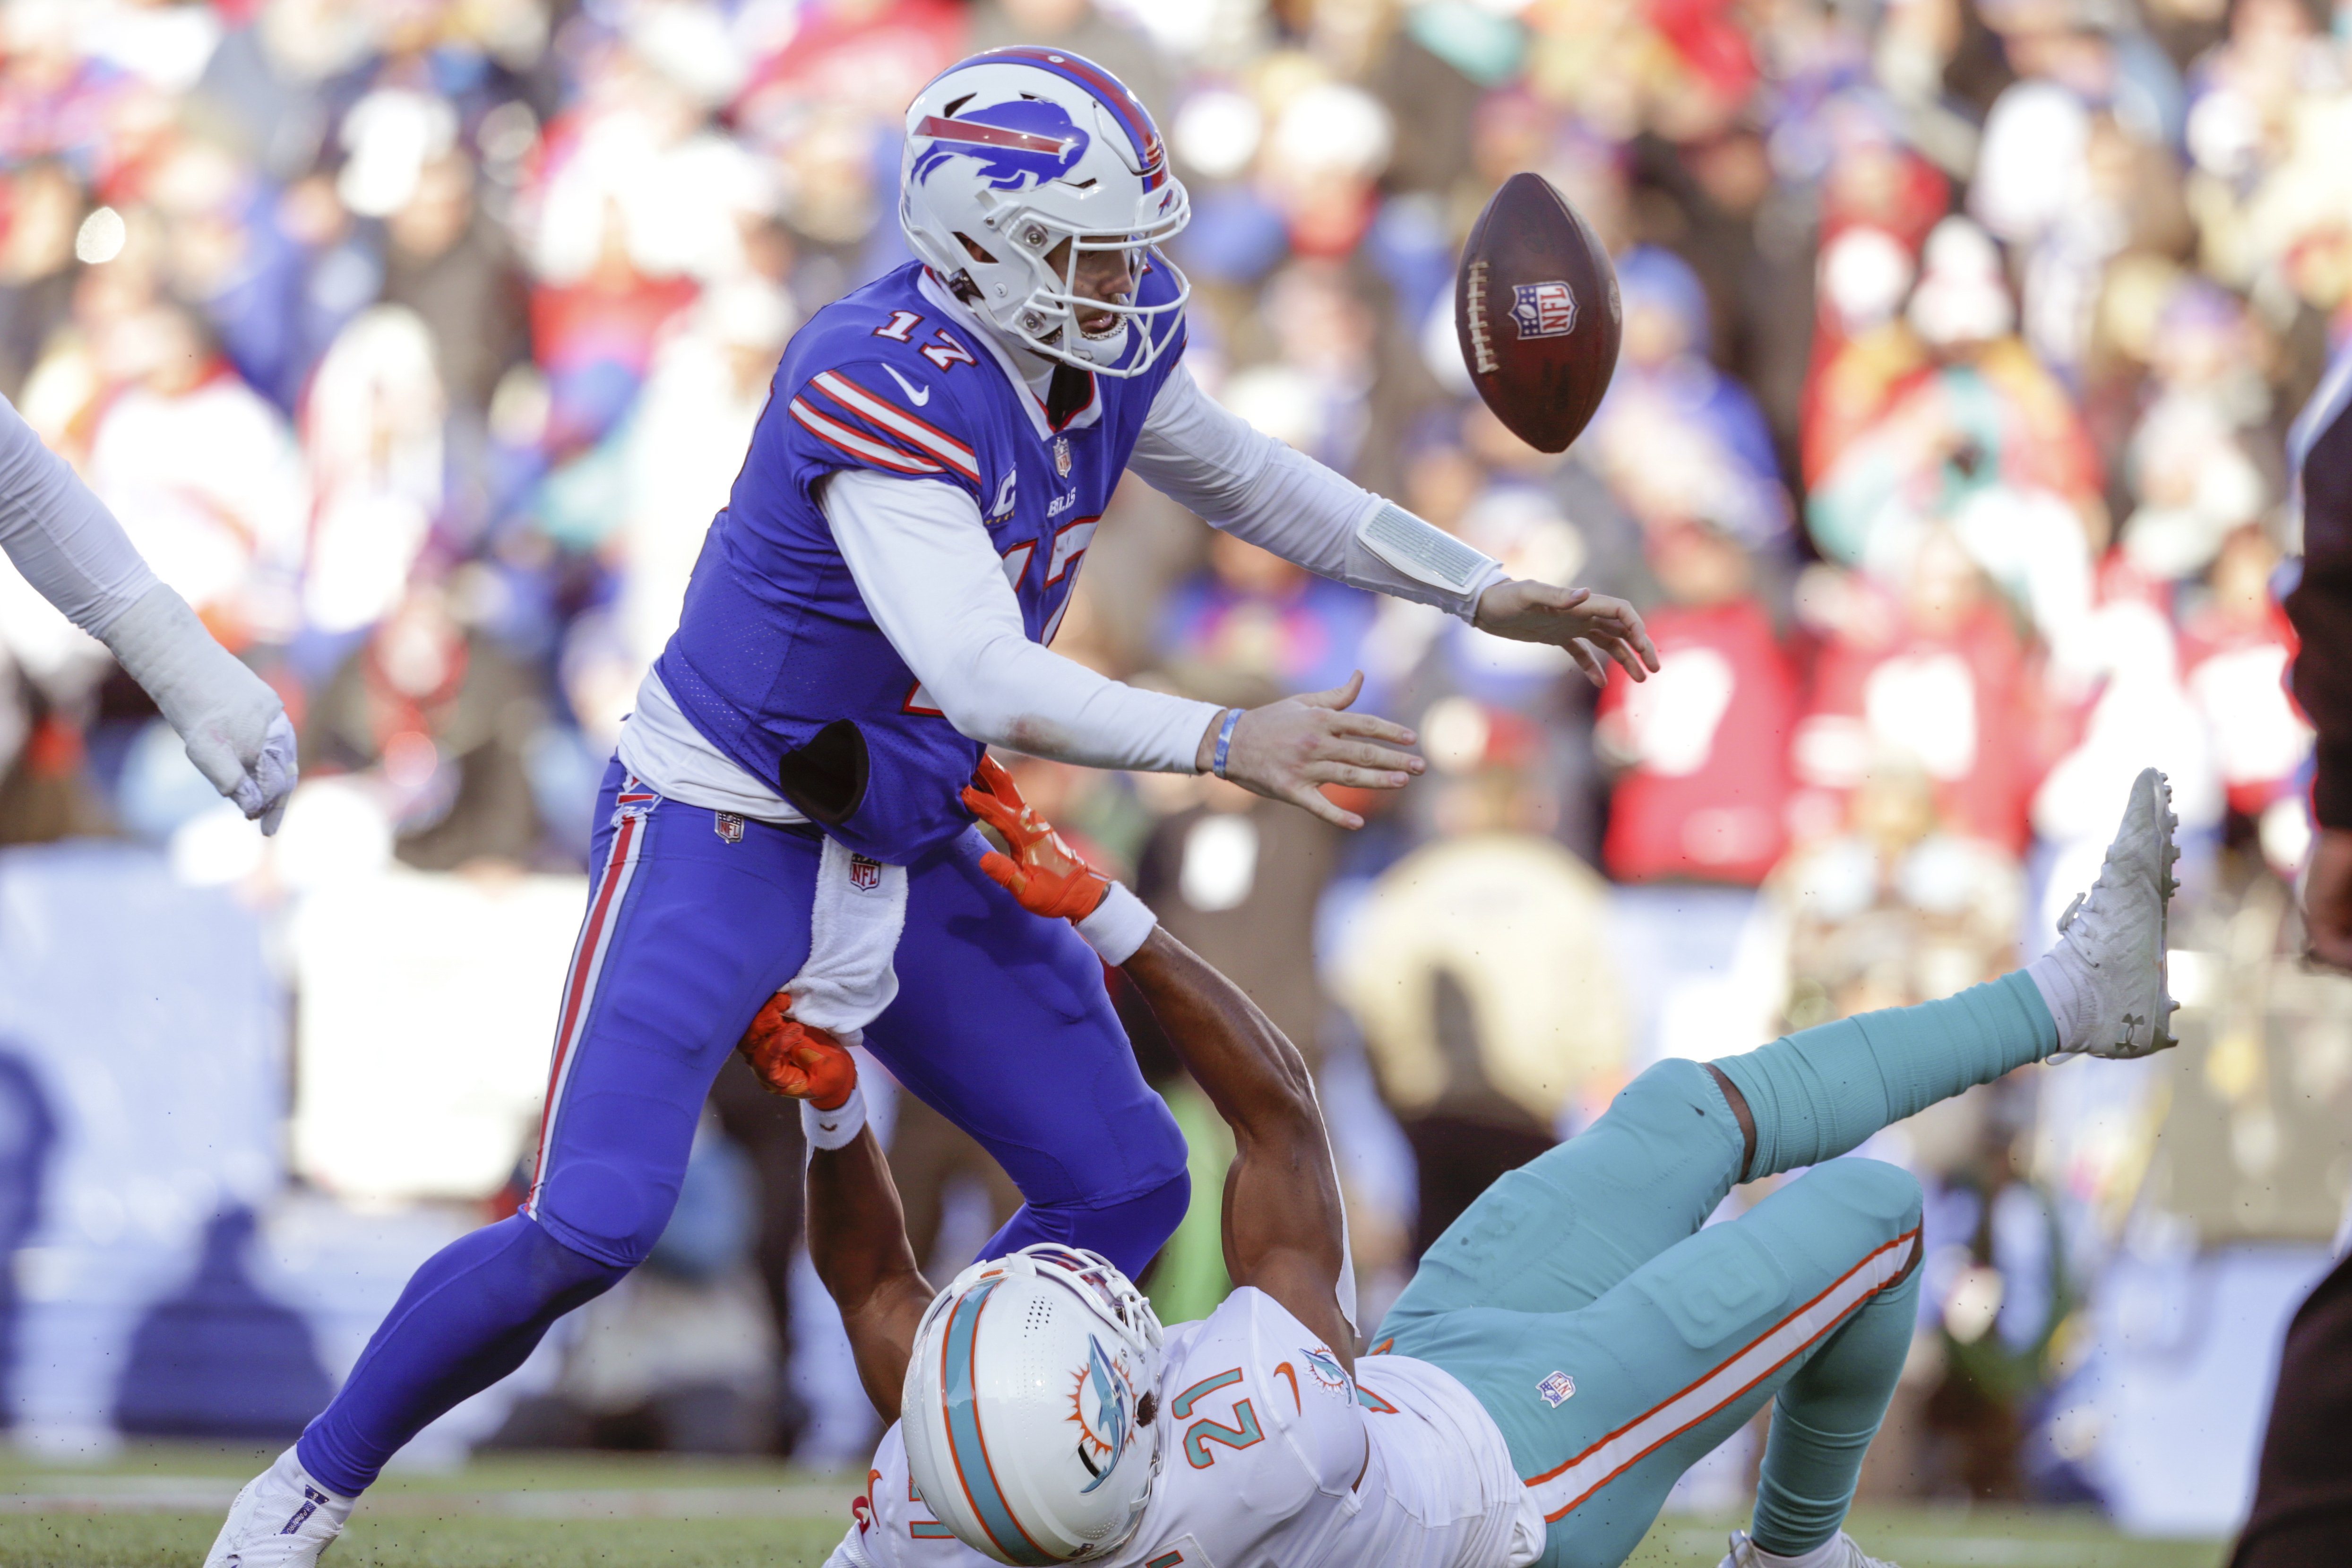 Report: New Dolphins, Vikings uniforms leaked - NBC Sports